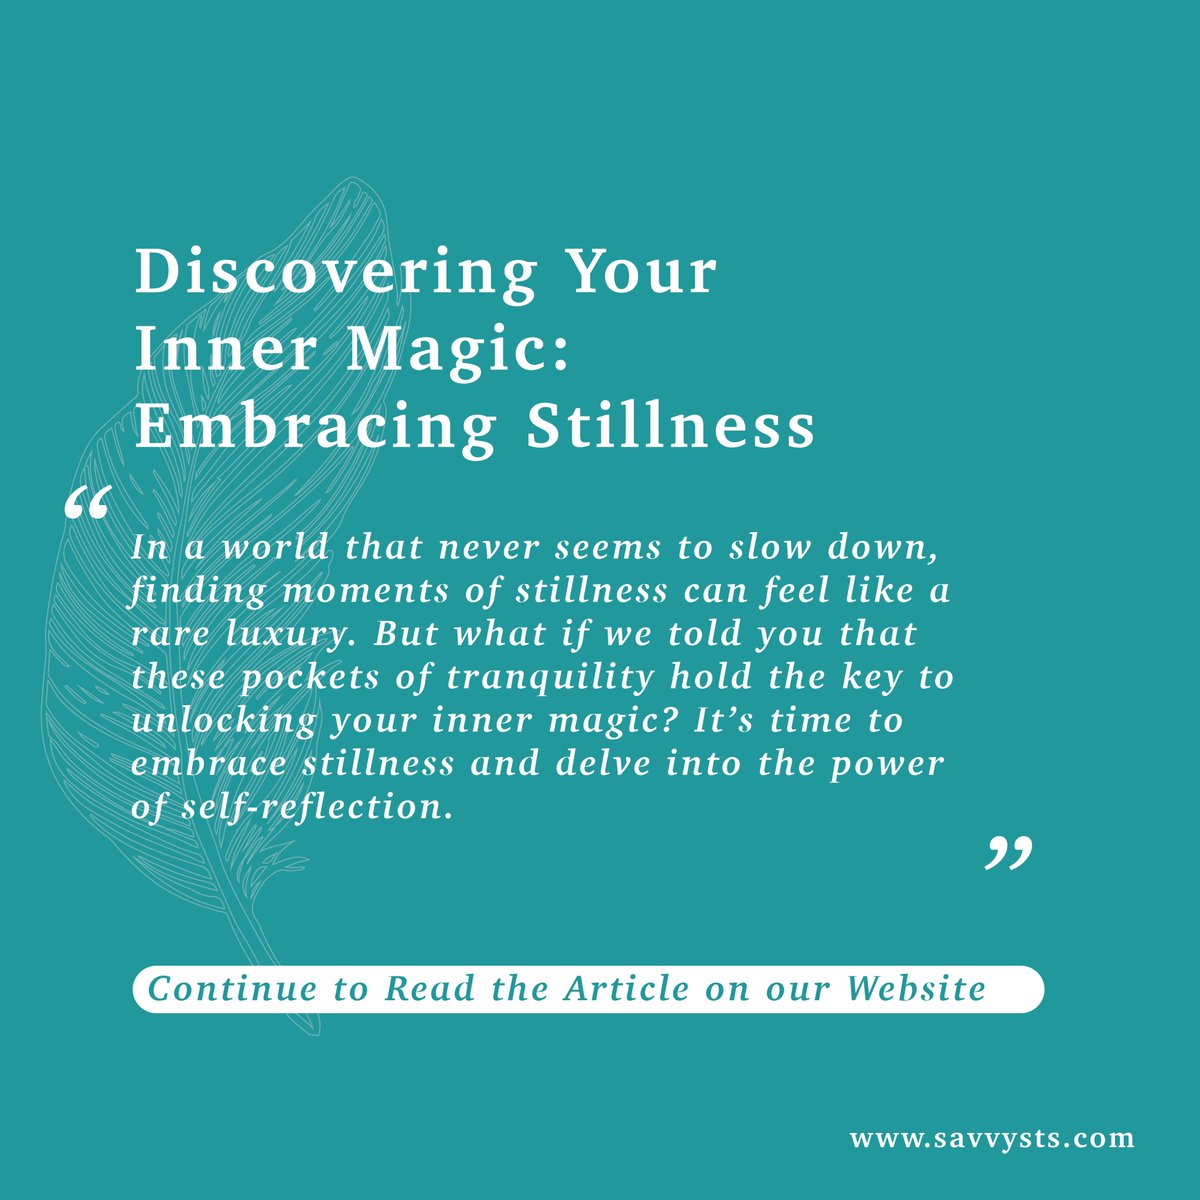 📚 Explore an illuminating article on savvysts.com that guides you on a journey of self-discovery and serenity. 

Check it out here: savvysts.com/discovering-yo…
#InnerMagic #EmbracingStillness #SavvyInsights